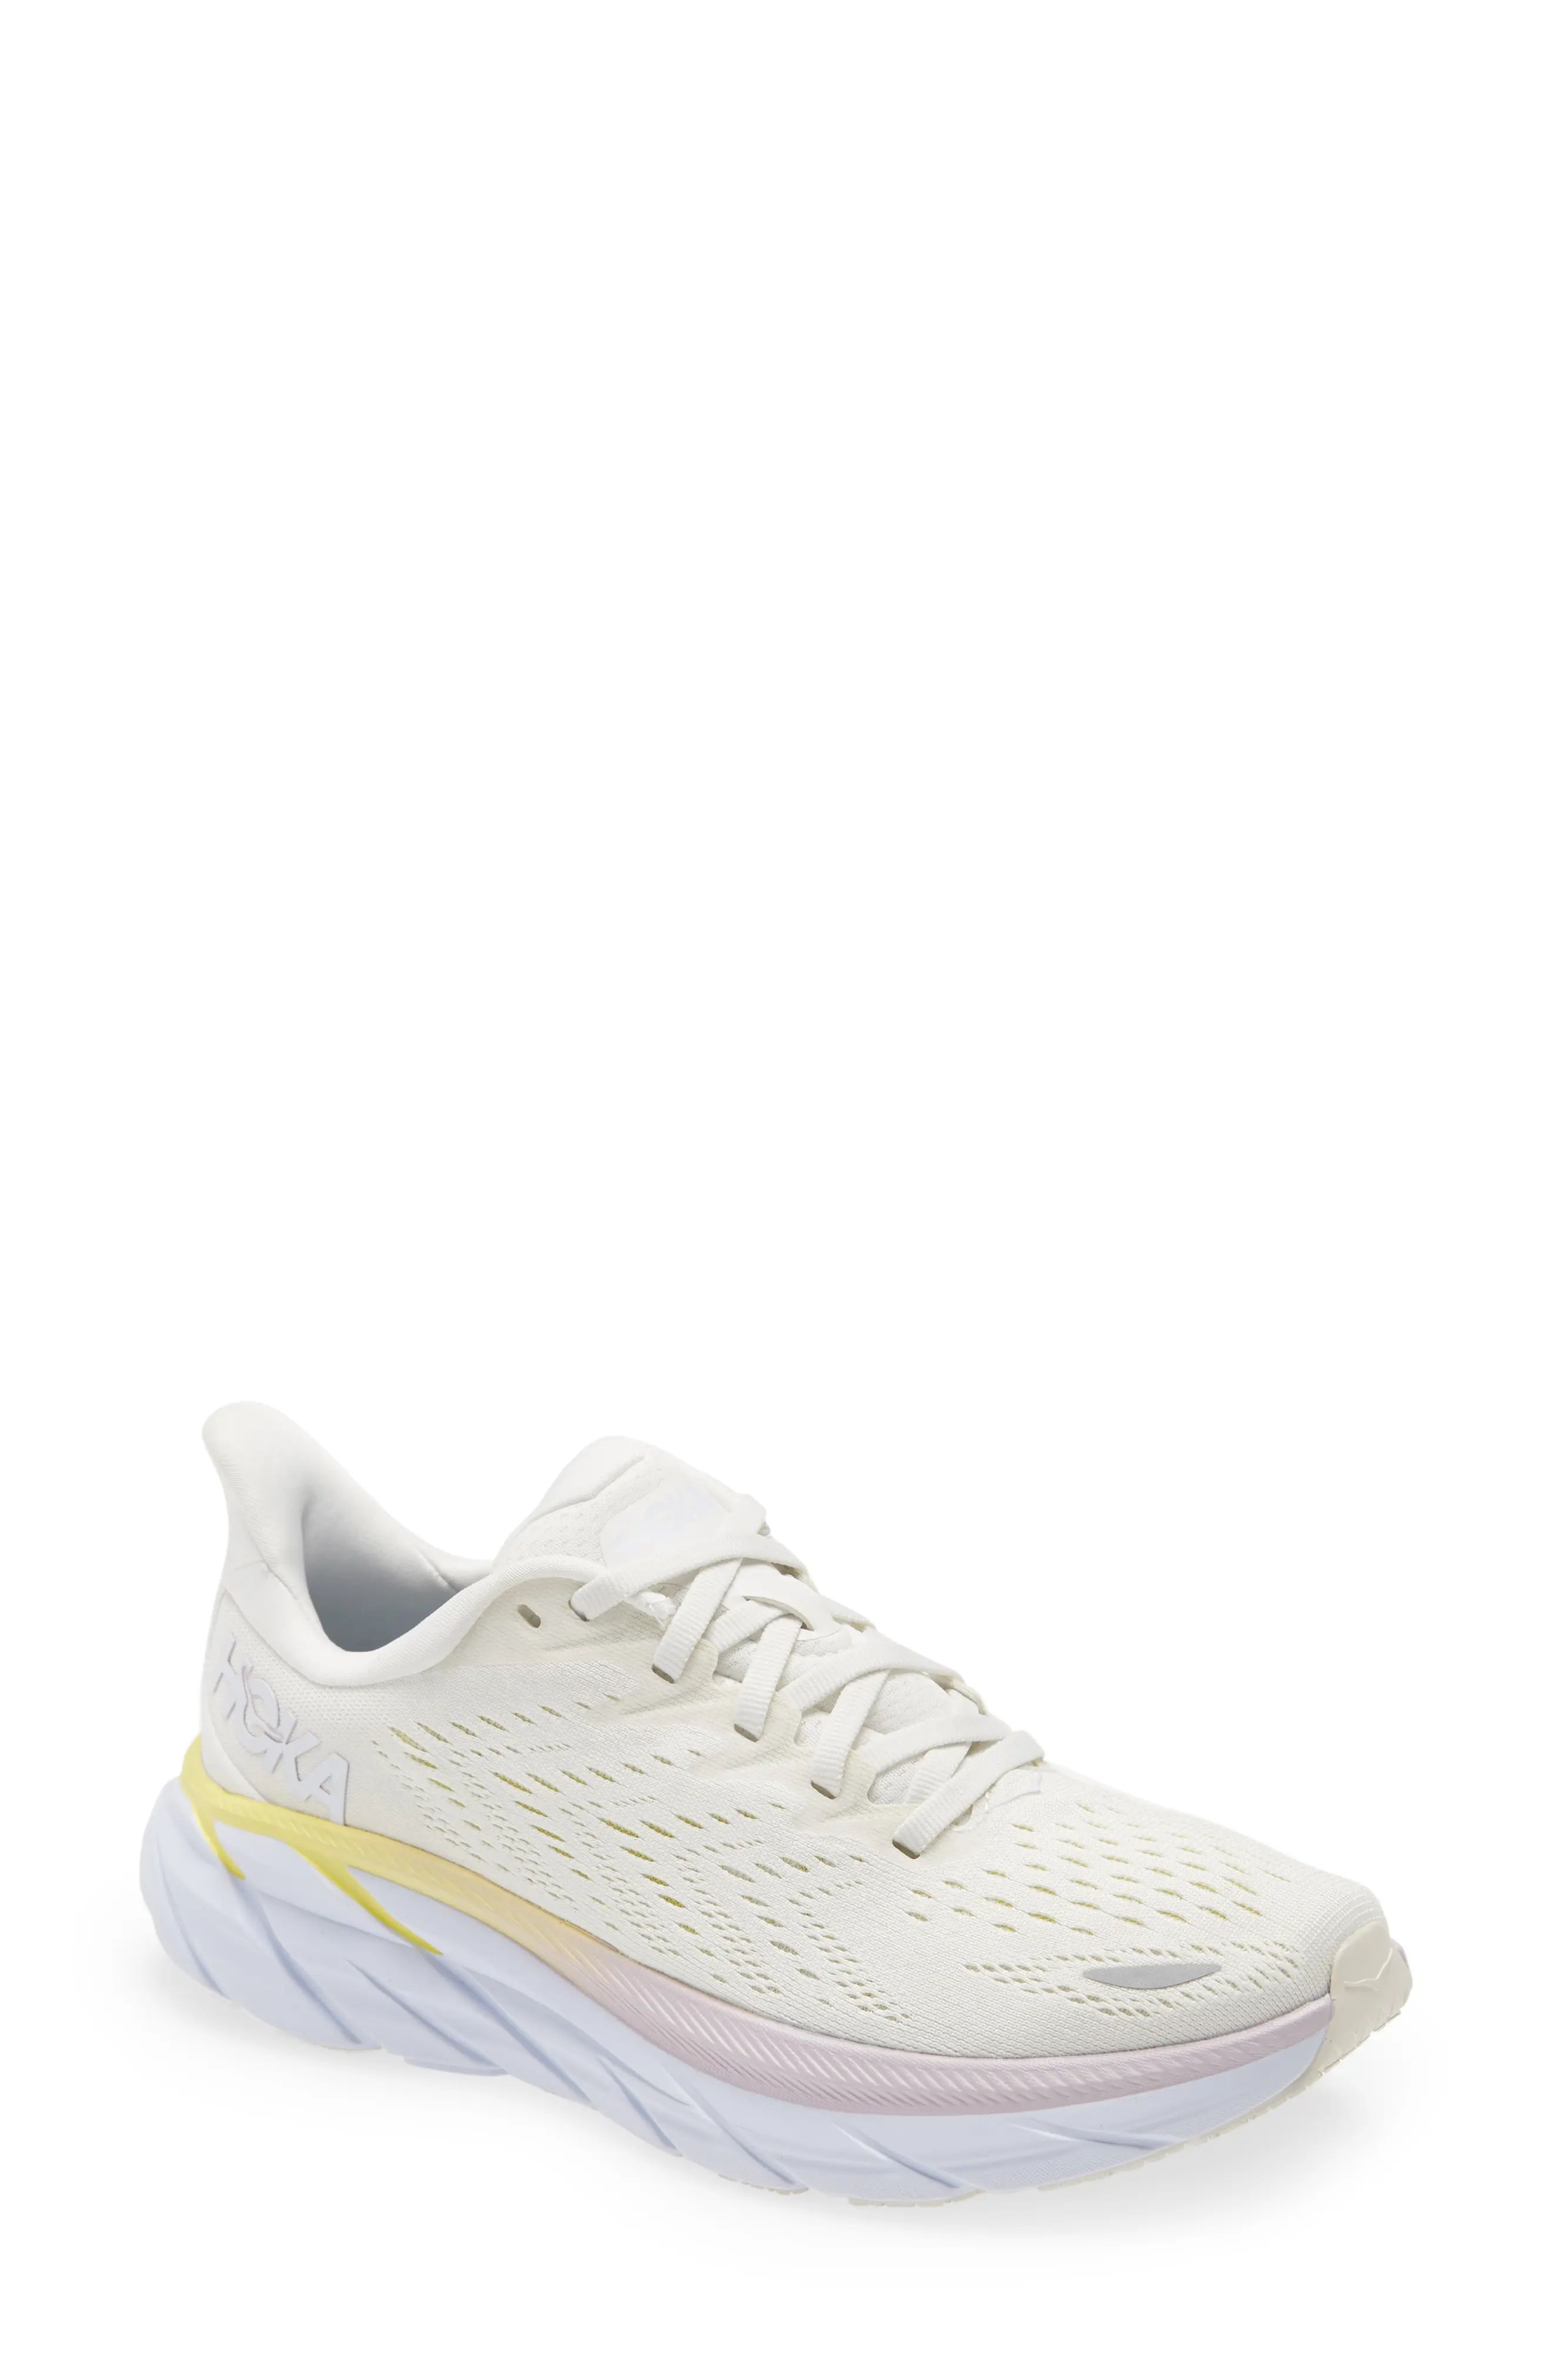 HOKA ONE ONE Clifton 8 Running Shoe in Blanc De Blanc/Bright White at Nordstrom, Size 5 | Nordstrom